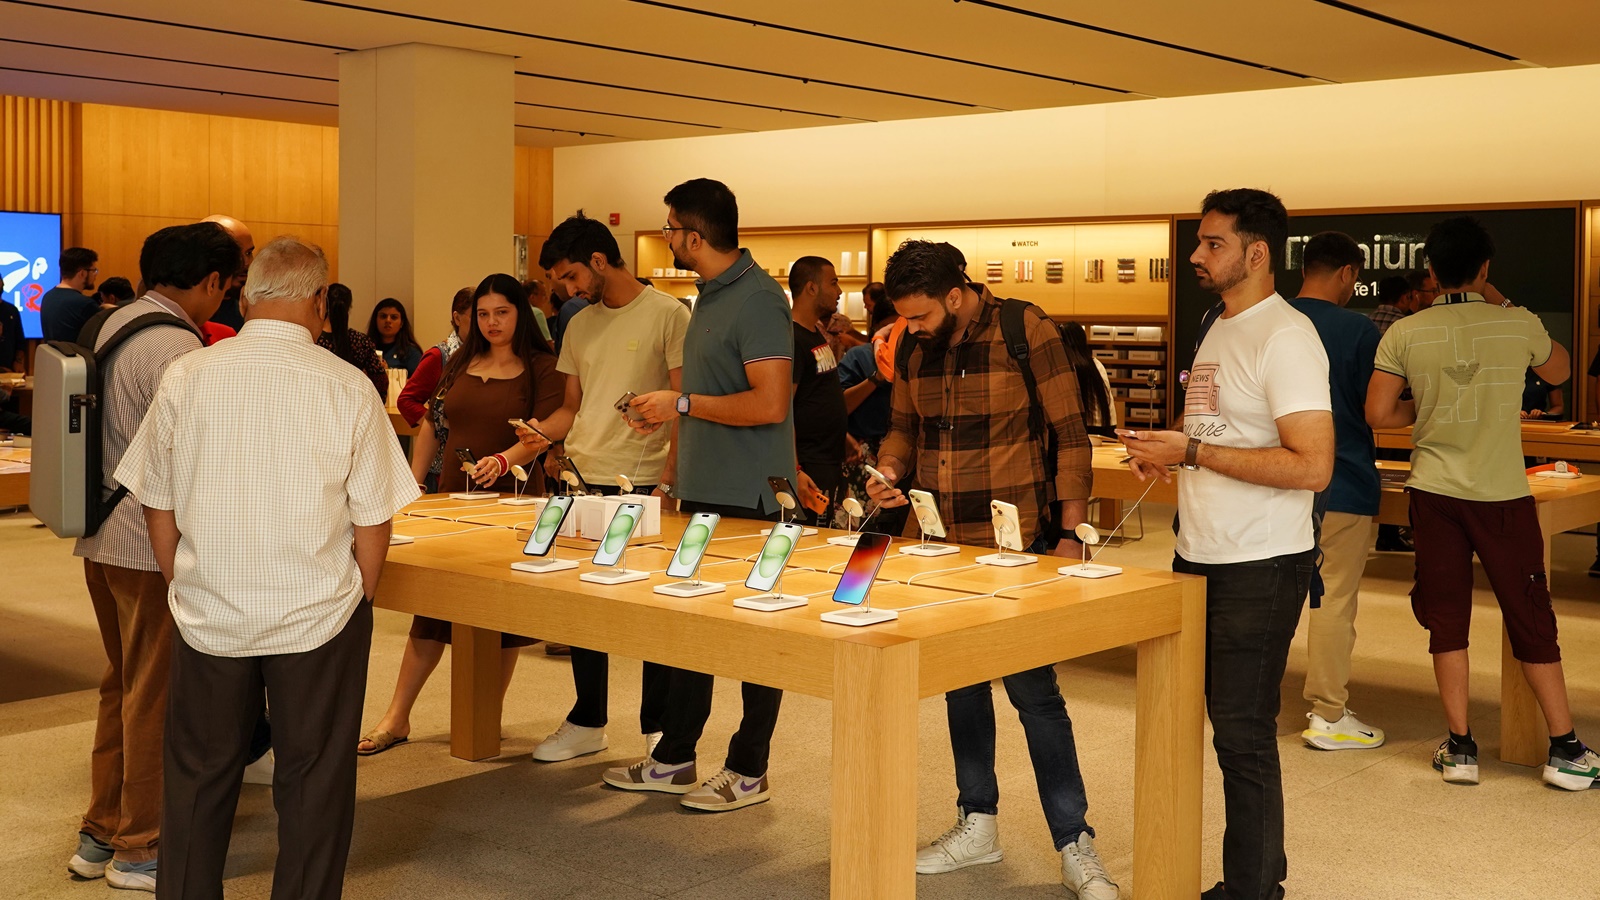 amazon, android, tech news of the week: apple reports double-digit growth in india, sam altman calls chatgpt ‘dumb’, and more